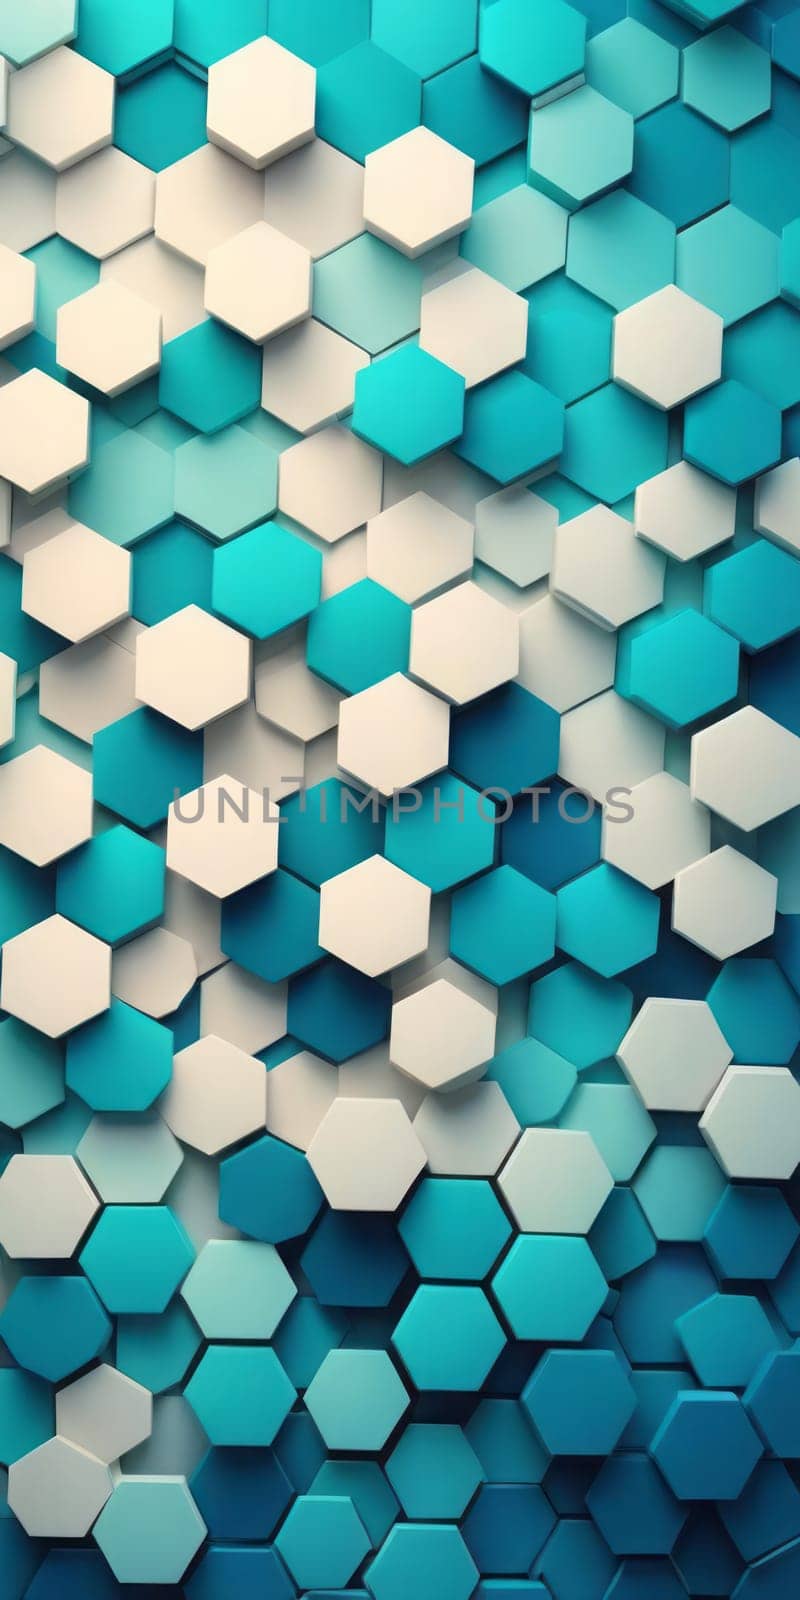 Hexagonal Shapes in White and Cyan by nkotlyar